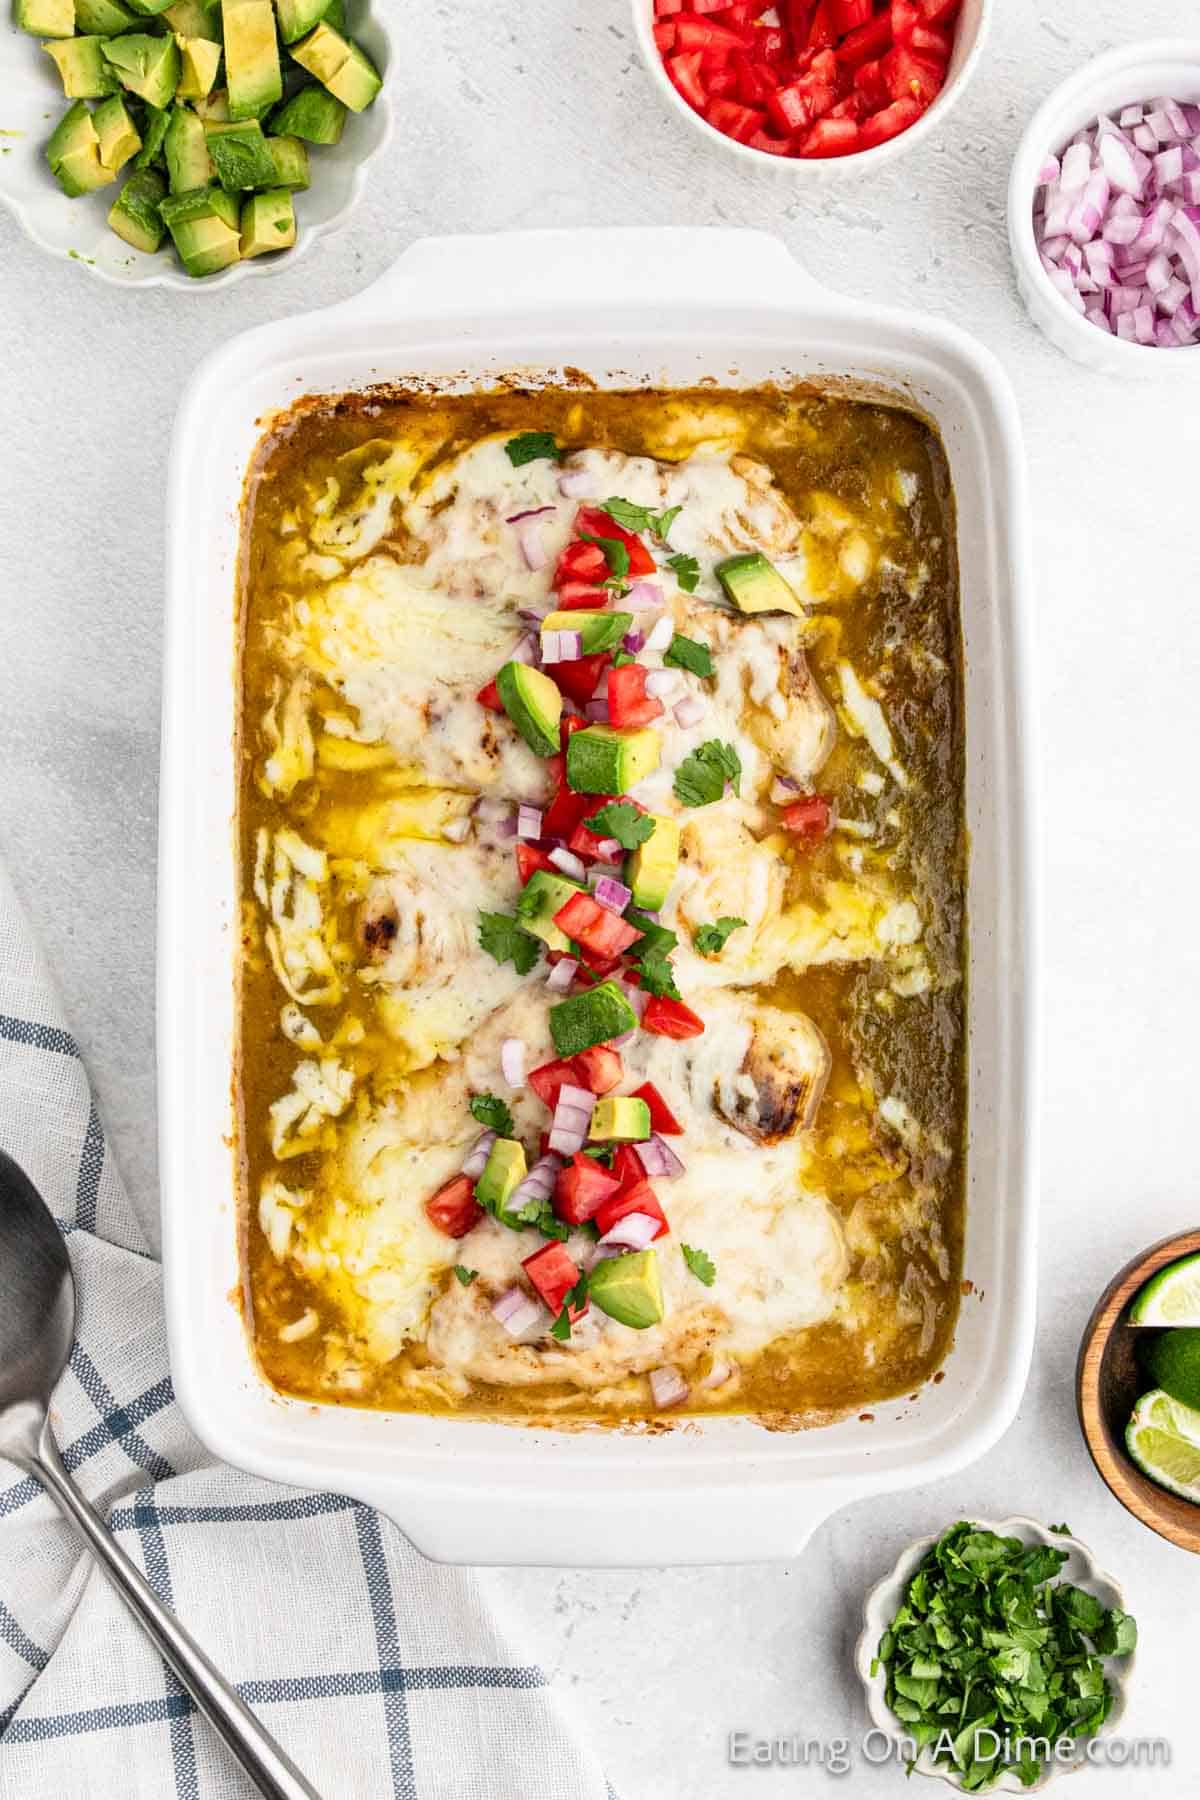 Baked enchilada chicken in a baking dish with enchilada sauce topped with melted cheese, diced avocado, tomato and fresh cilantro